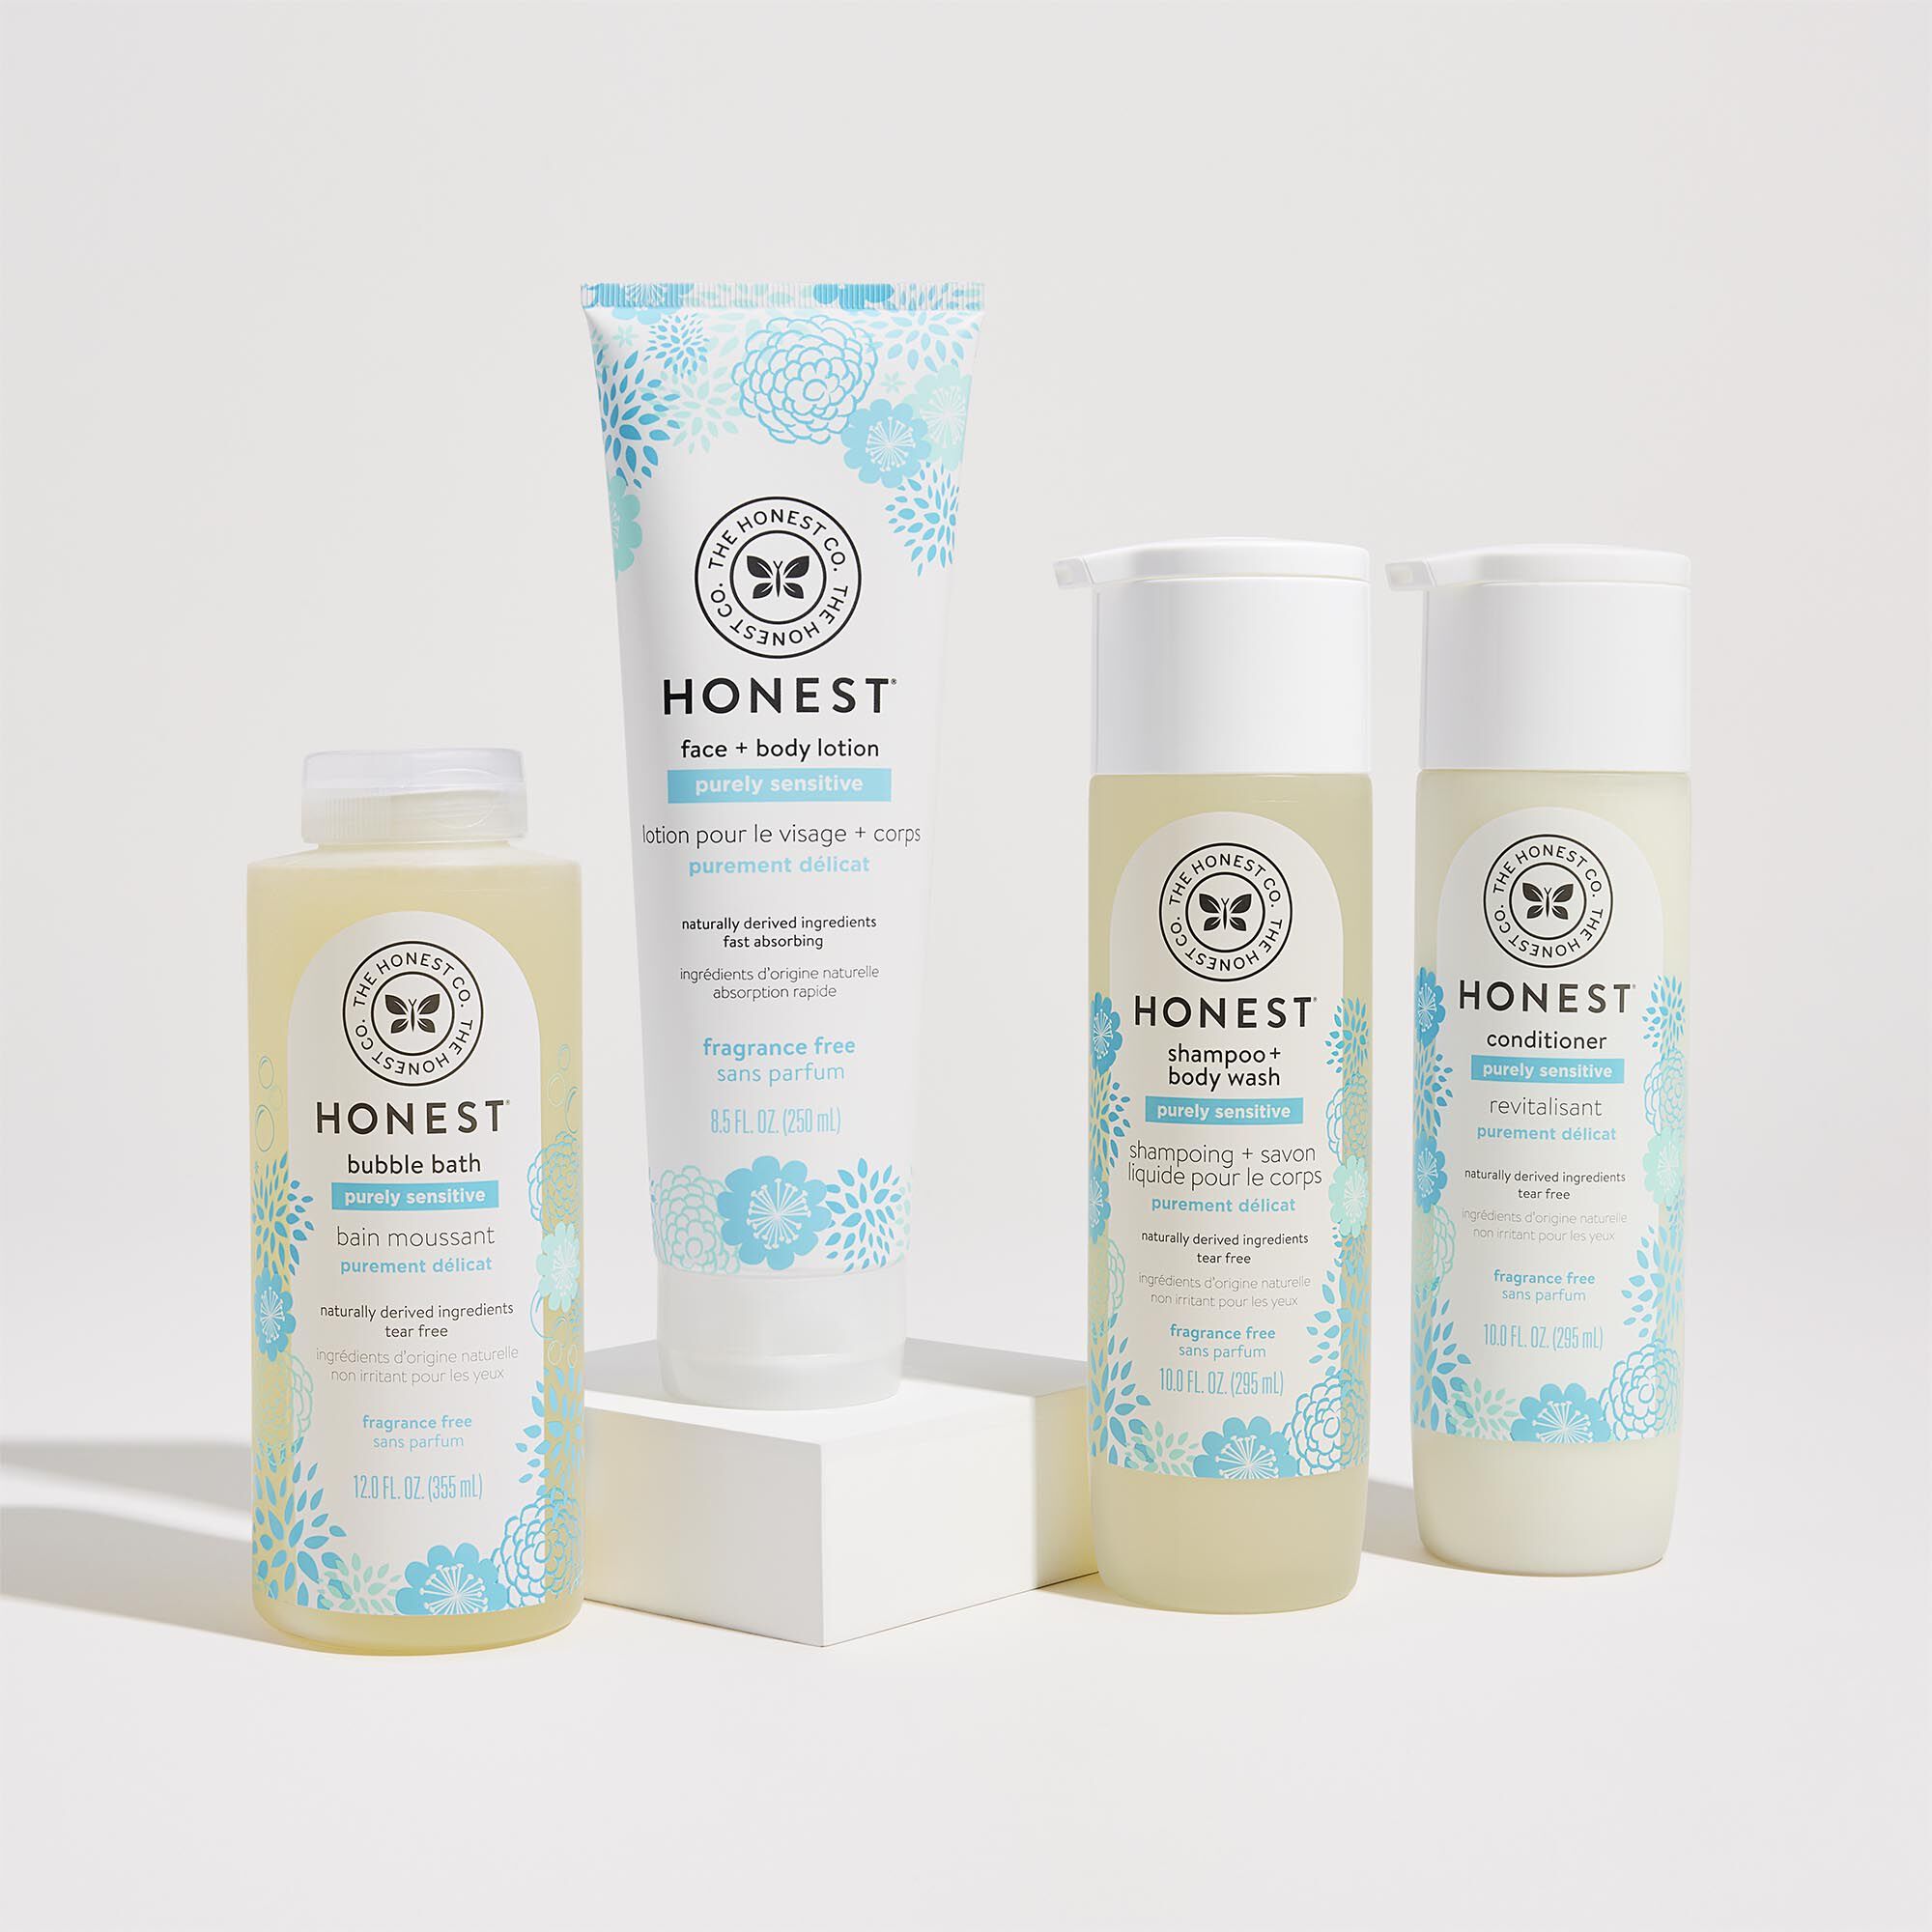 Purely Sensitive Collection | The Honest Company